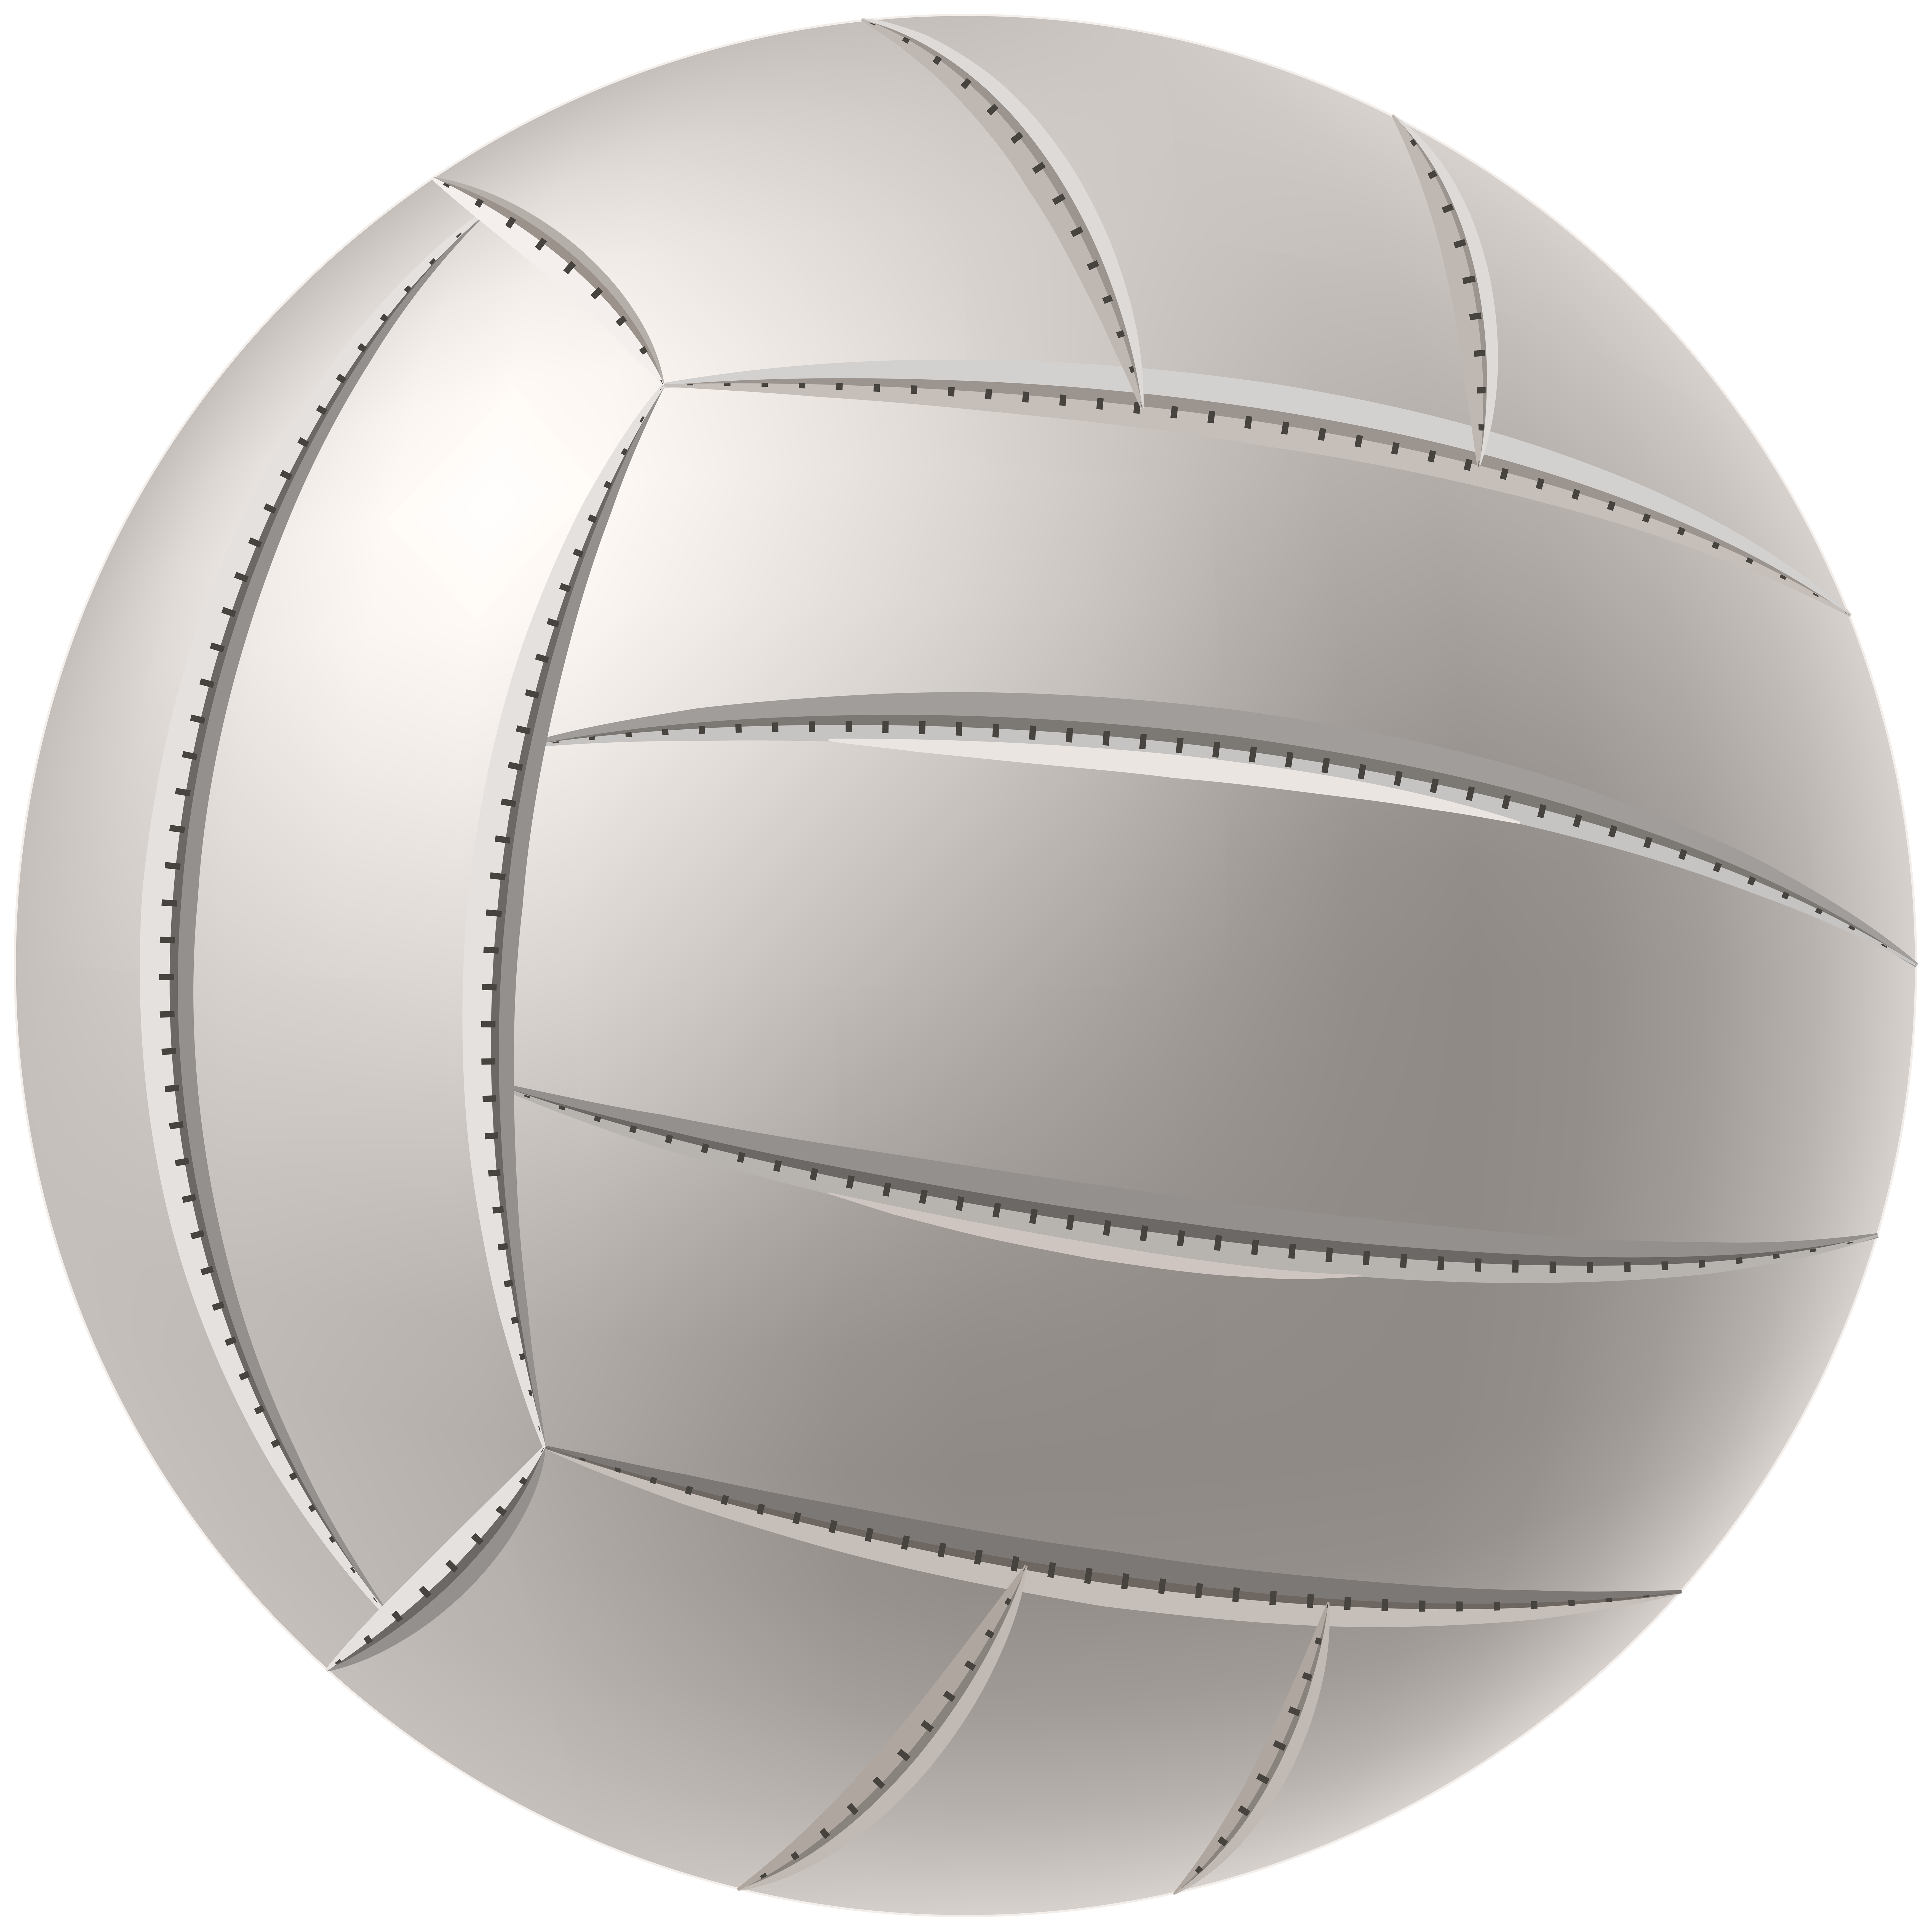 Volleyball Clip art - Volleyball PNG Clip Art Image png download - 7004 ...